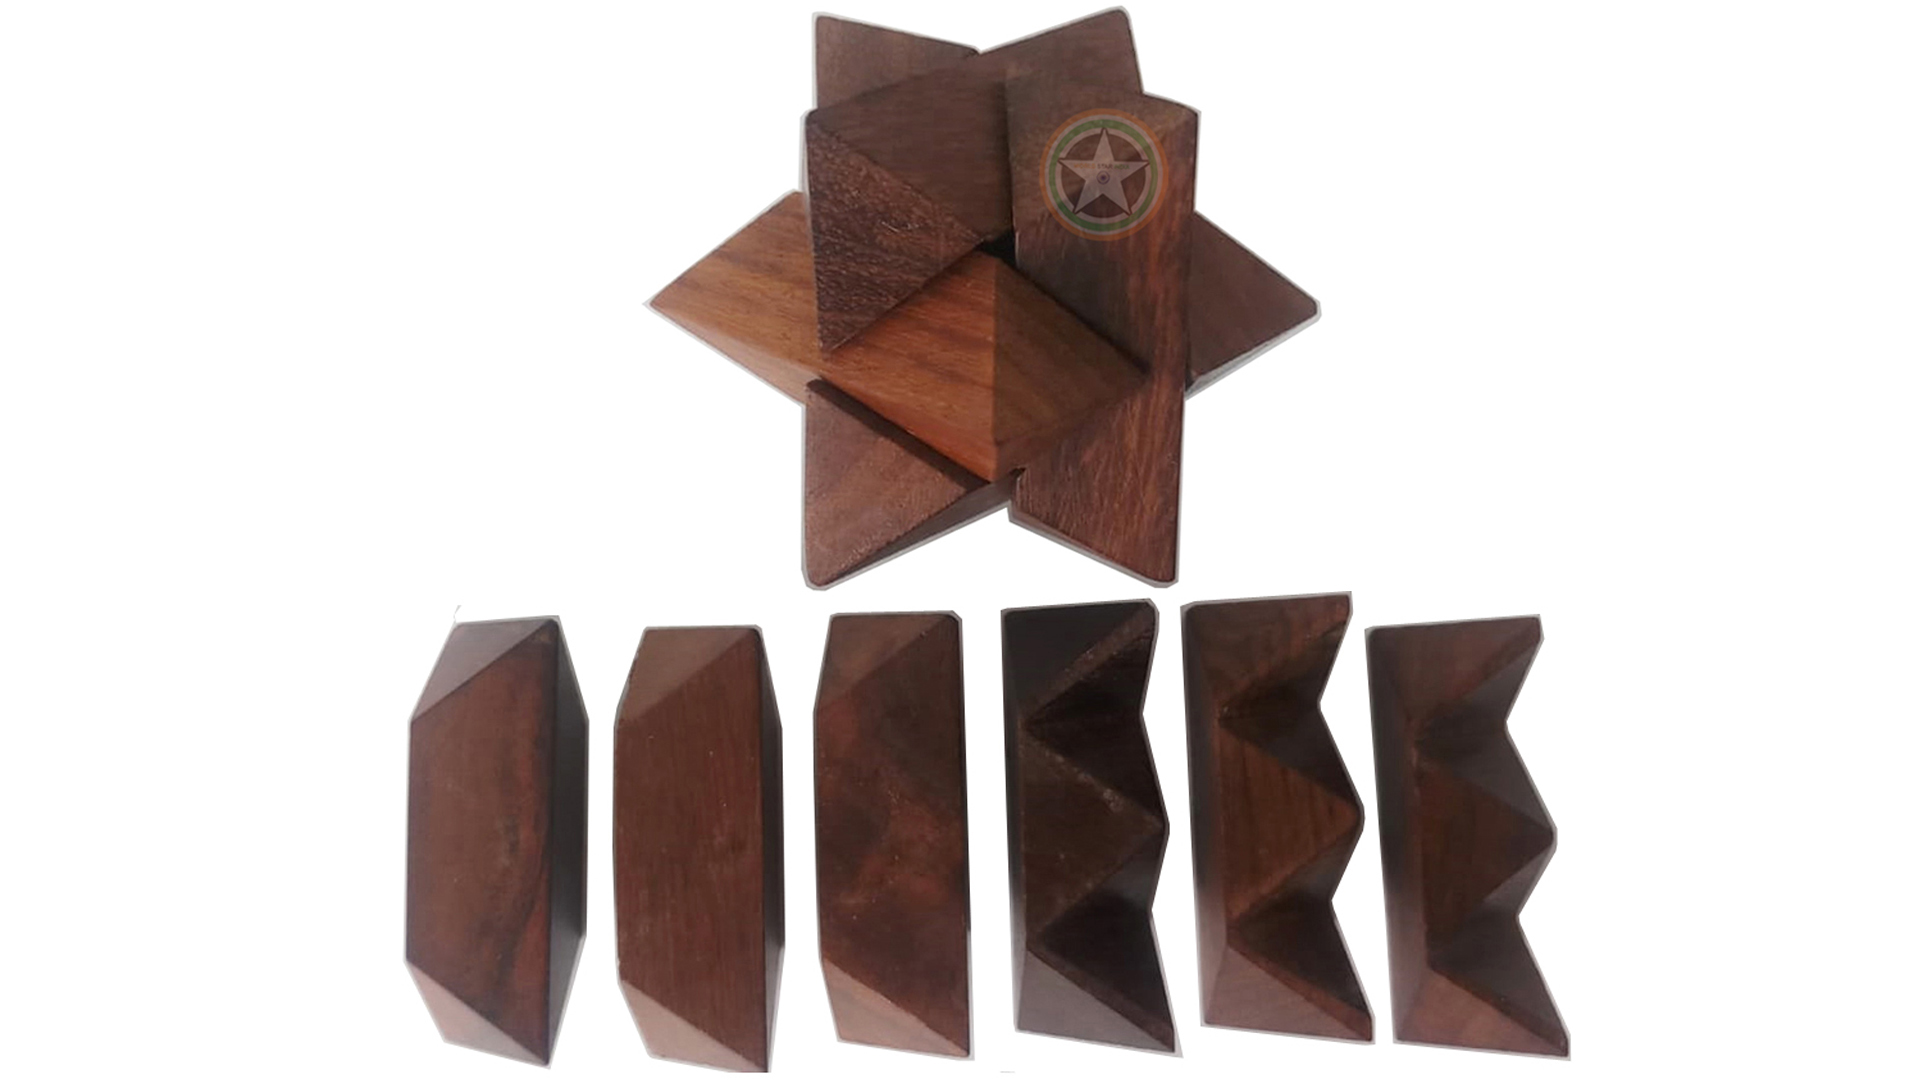 WORLD STAR INDIA Wooden Star Puzzle/Jigsaw Puzzle/Burr Puzzle/Interlocking Puzzle/Fun for Adults Challenging Game/This Travelling for Time Pass Game/Also Uses for Paper Weight, Home Office Decorative from World Star India